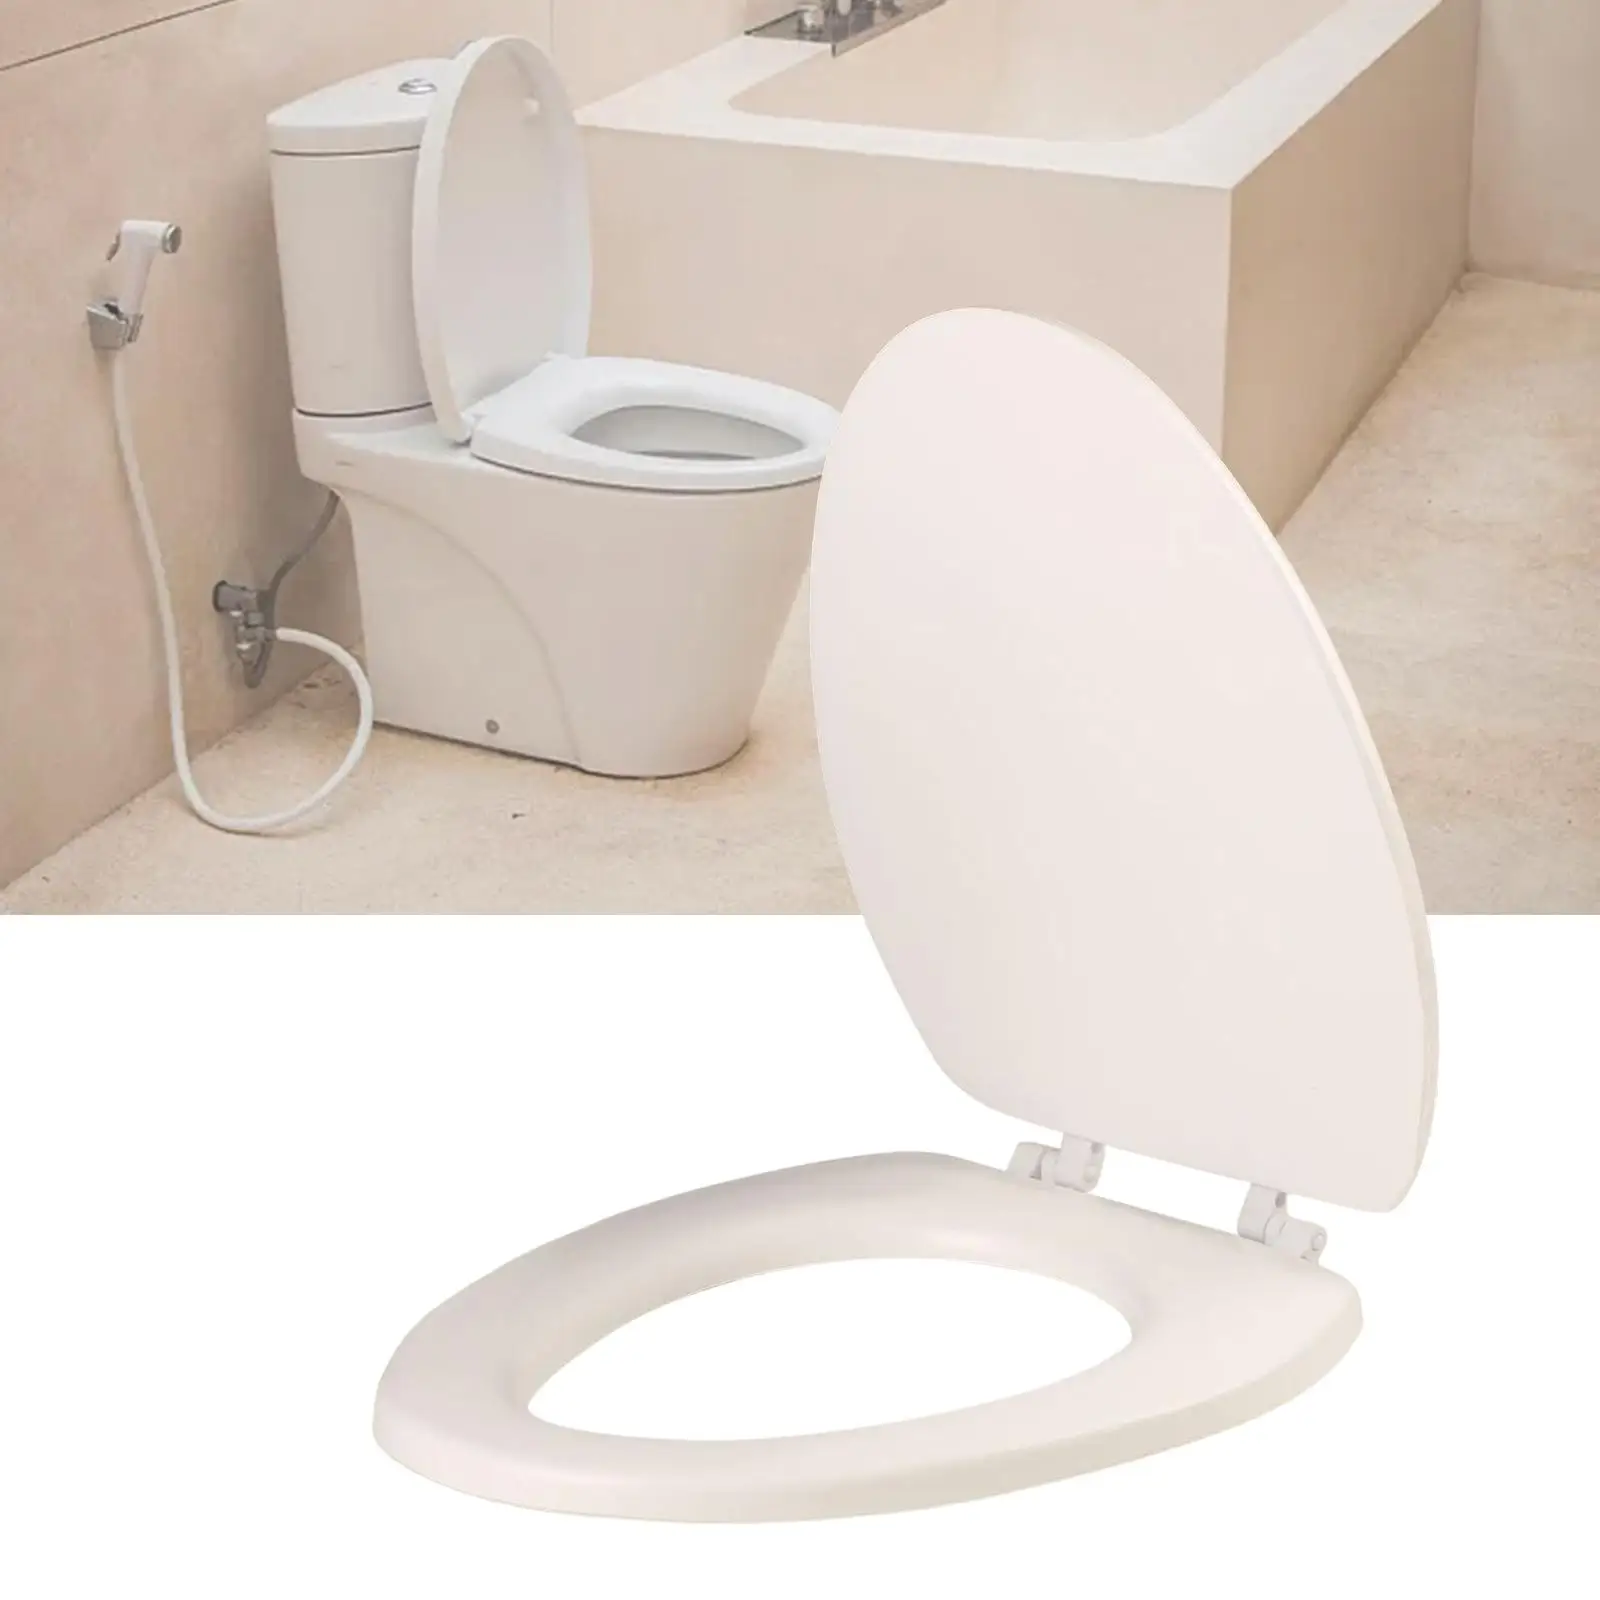 Toilet Cover Cushion and Lid Durable Accessory Bathroom Supplies Easily Clean and Install Soft Pad Removable Waterproof Washable